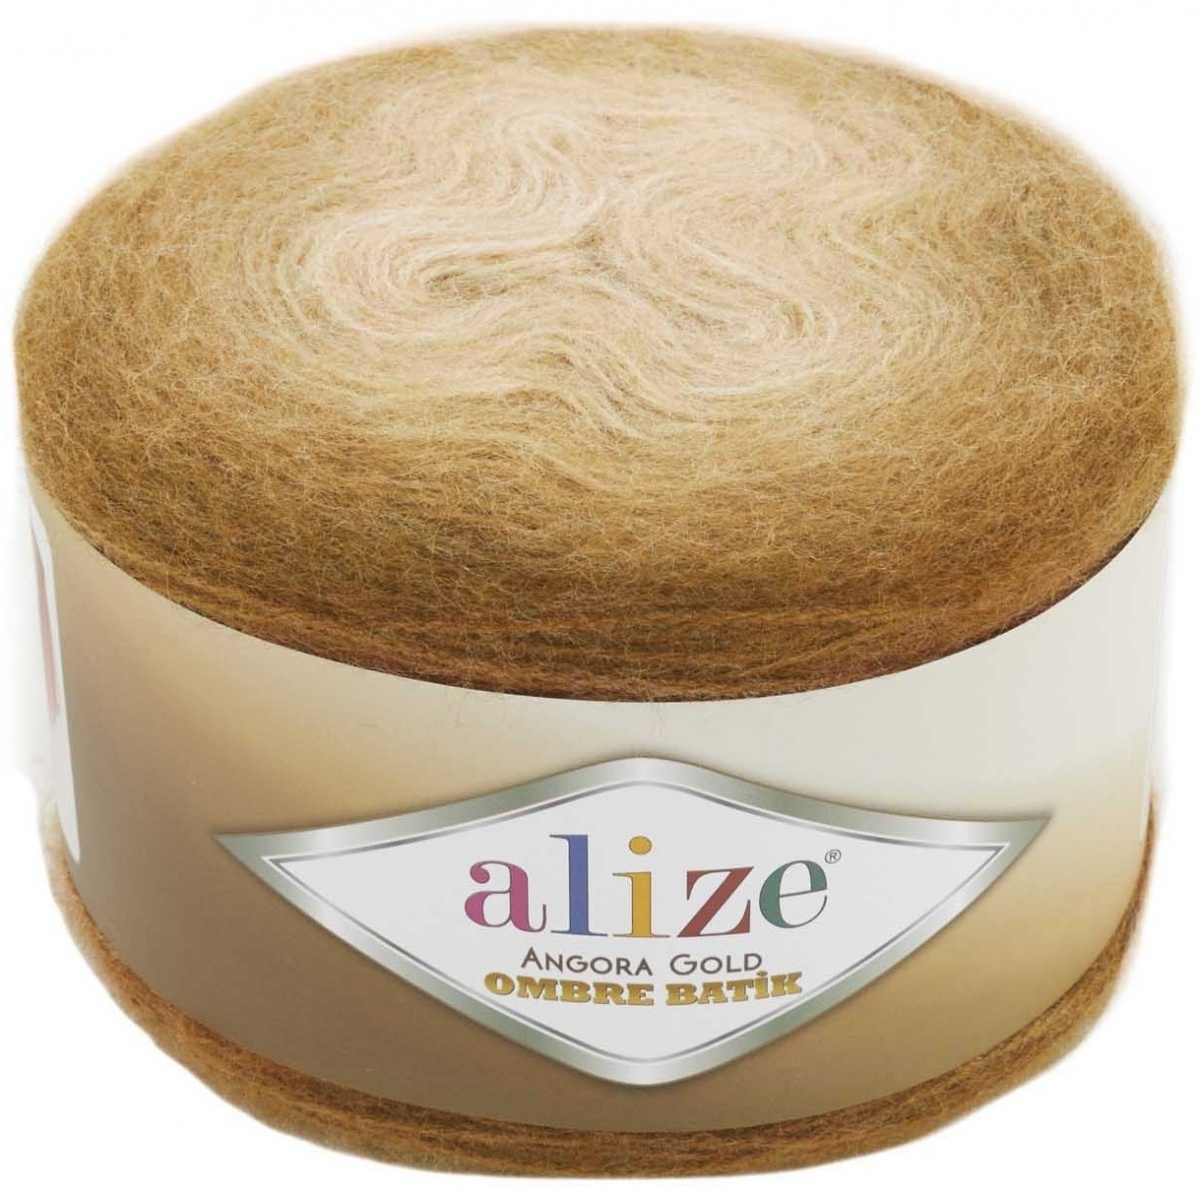 Alize Angora Gold Ombre Batik, 20% Wool, 80% Acrylic 4 Skein Value Pack, 600g фото 15